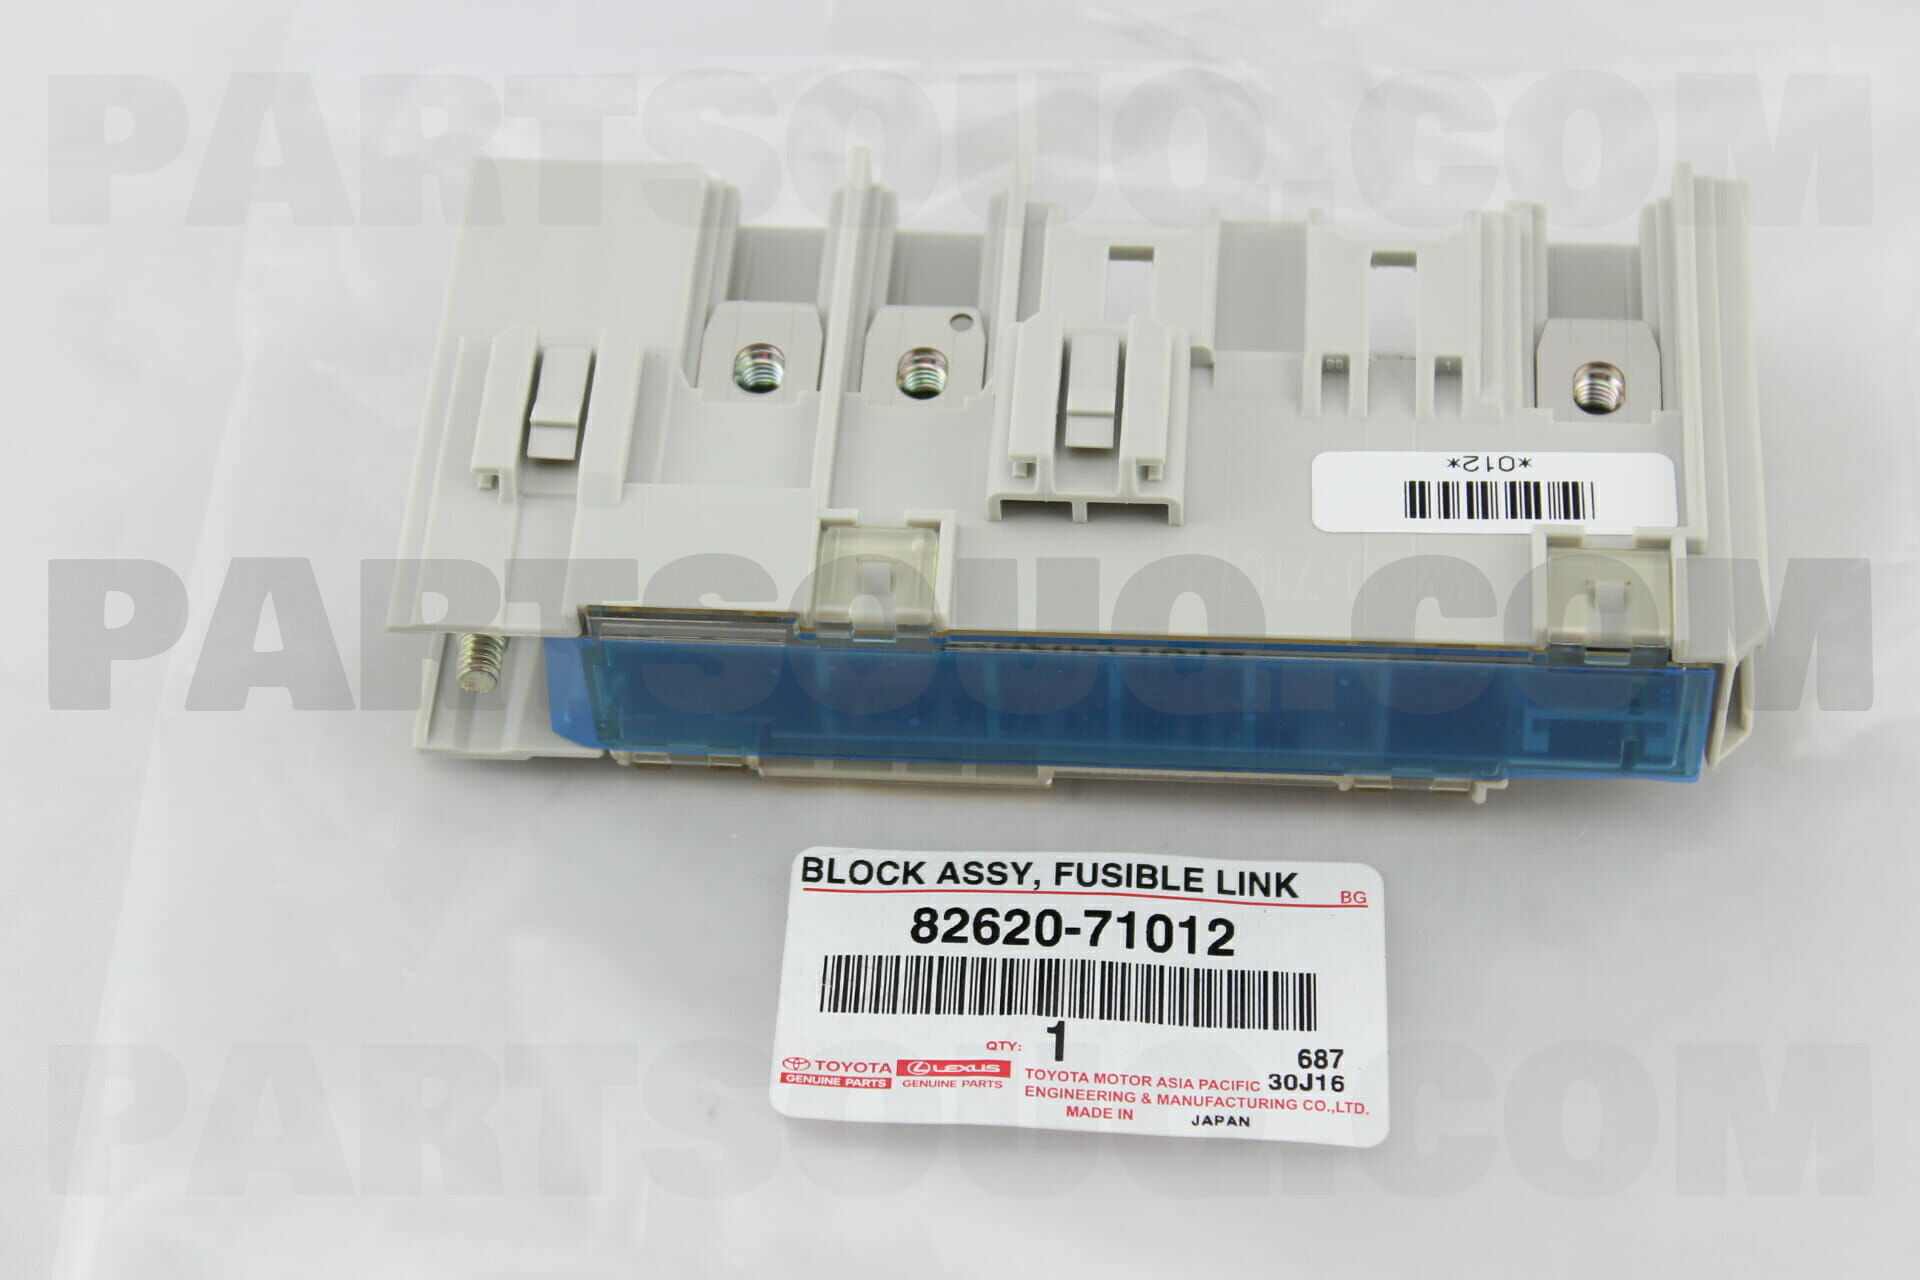 FUSIBLE LINK 82620-71012 8262071012 Genuine Toyota BLOCK ASSY